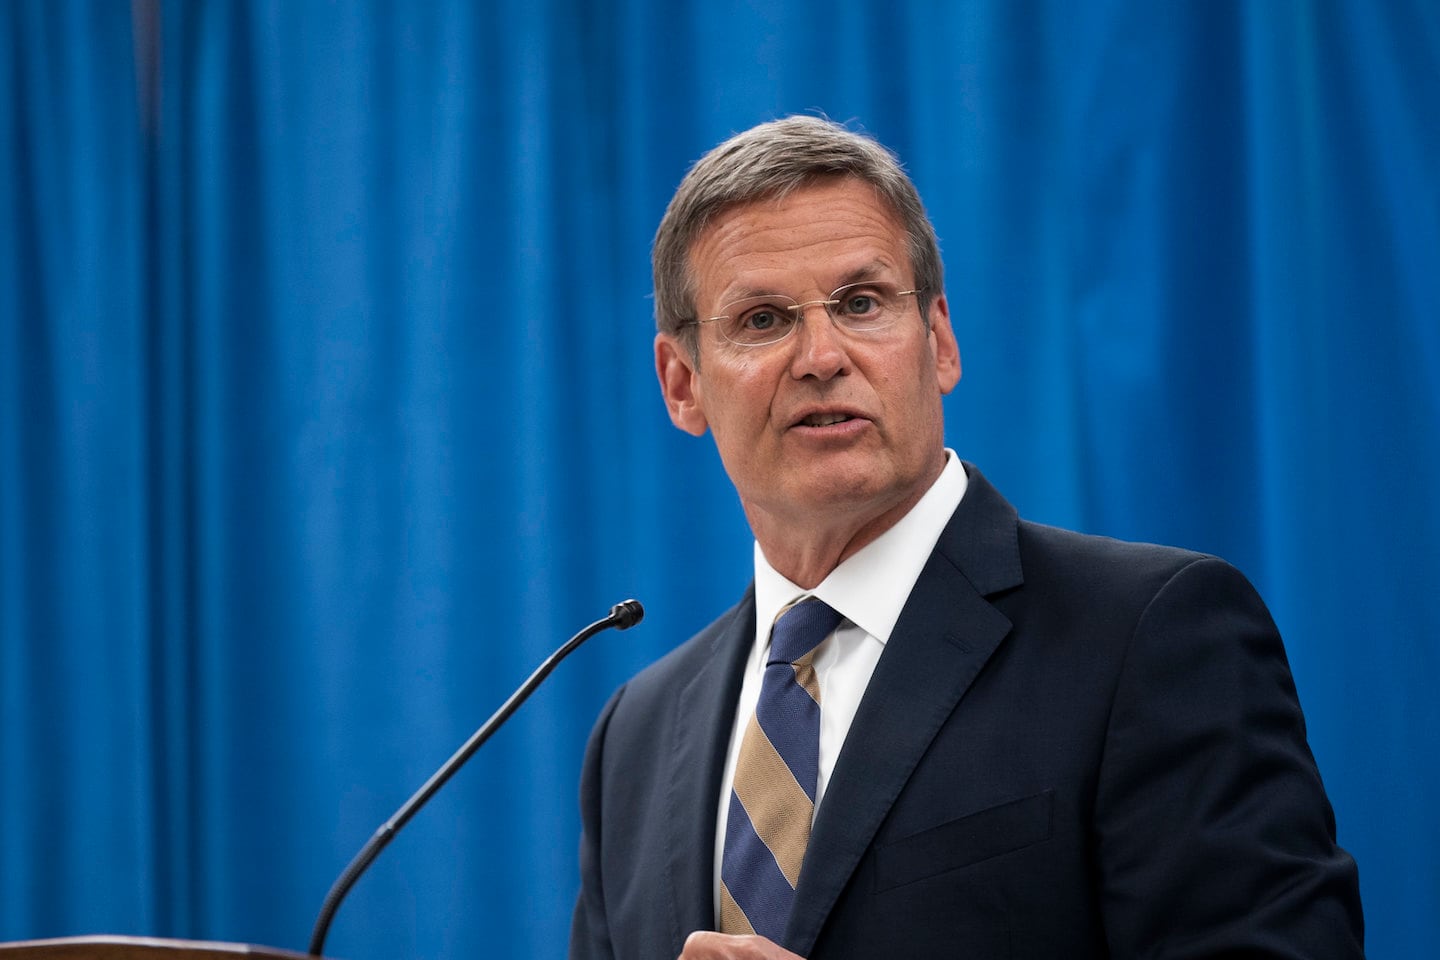 Gov. Bill Lee has been at the helm of Tennessee during the coronavirus pandemic.